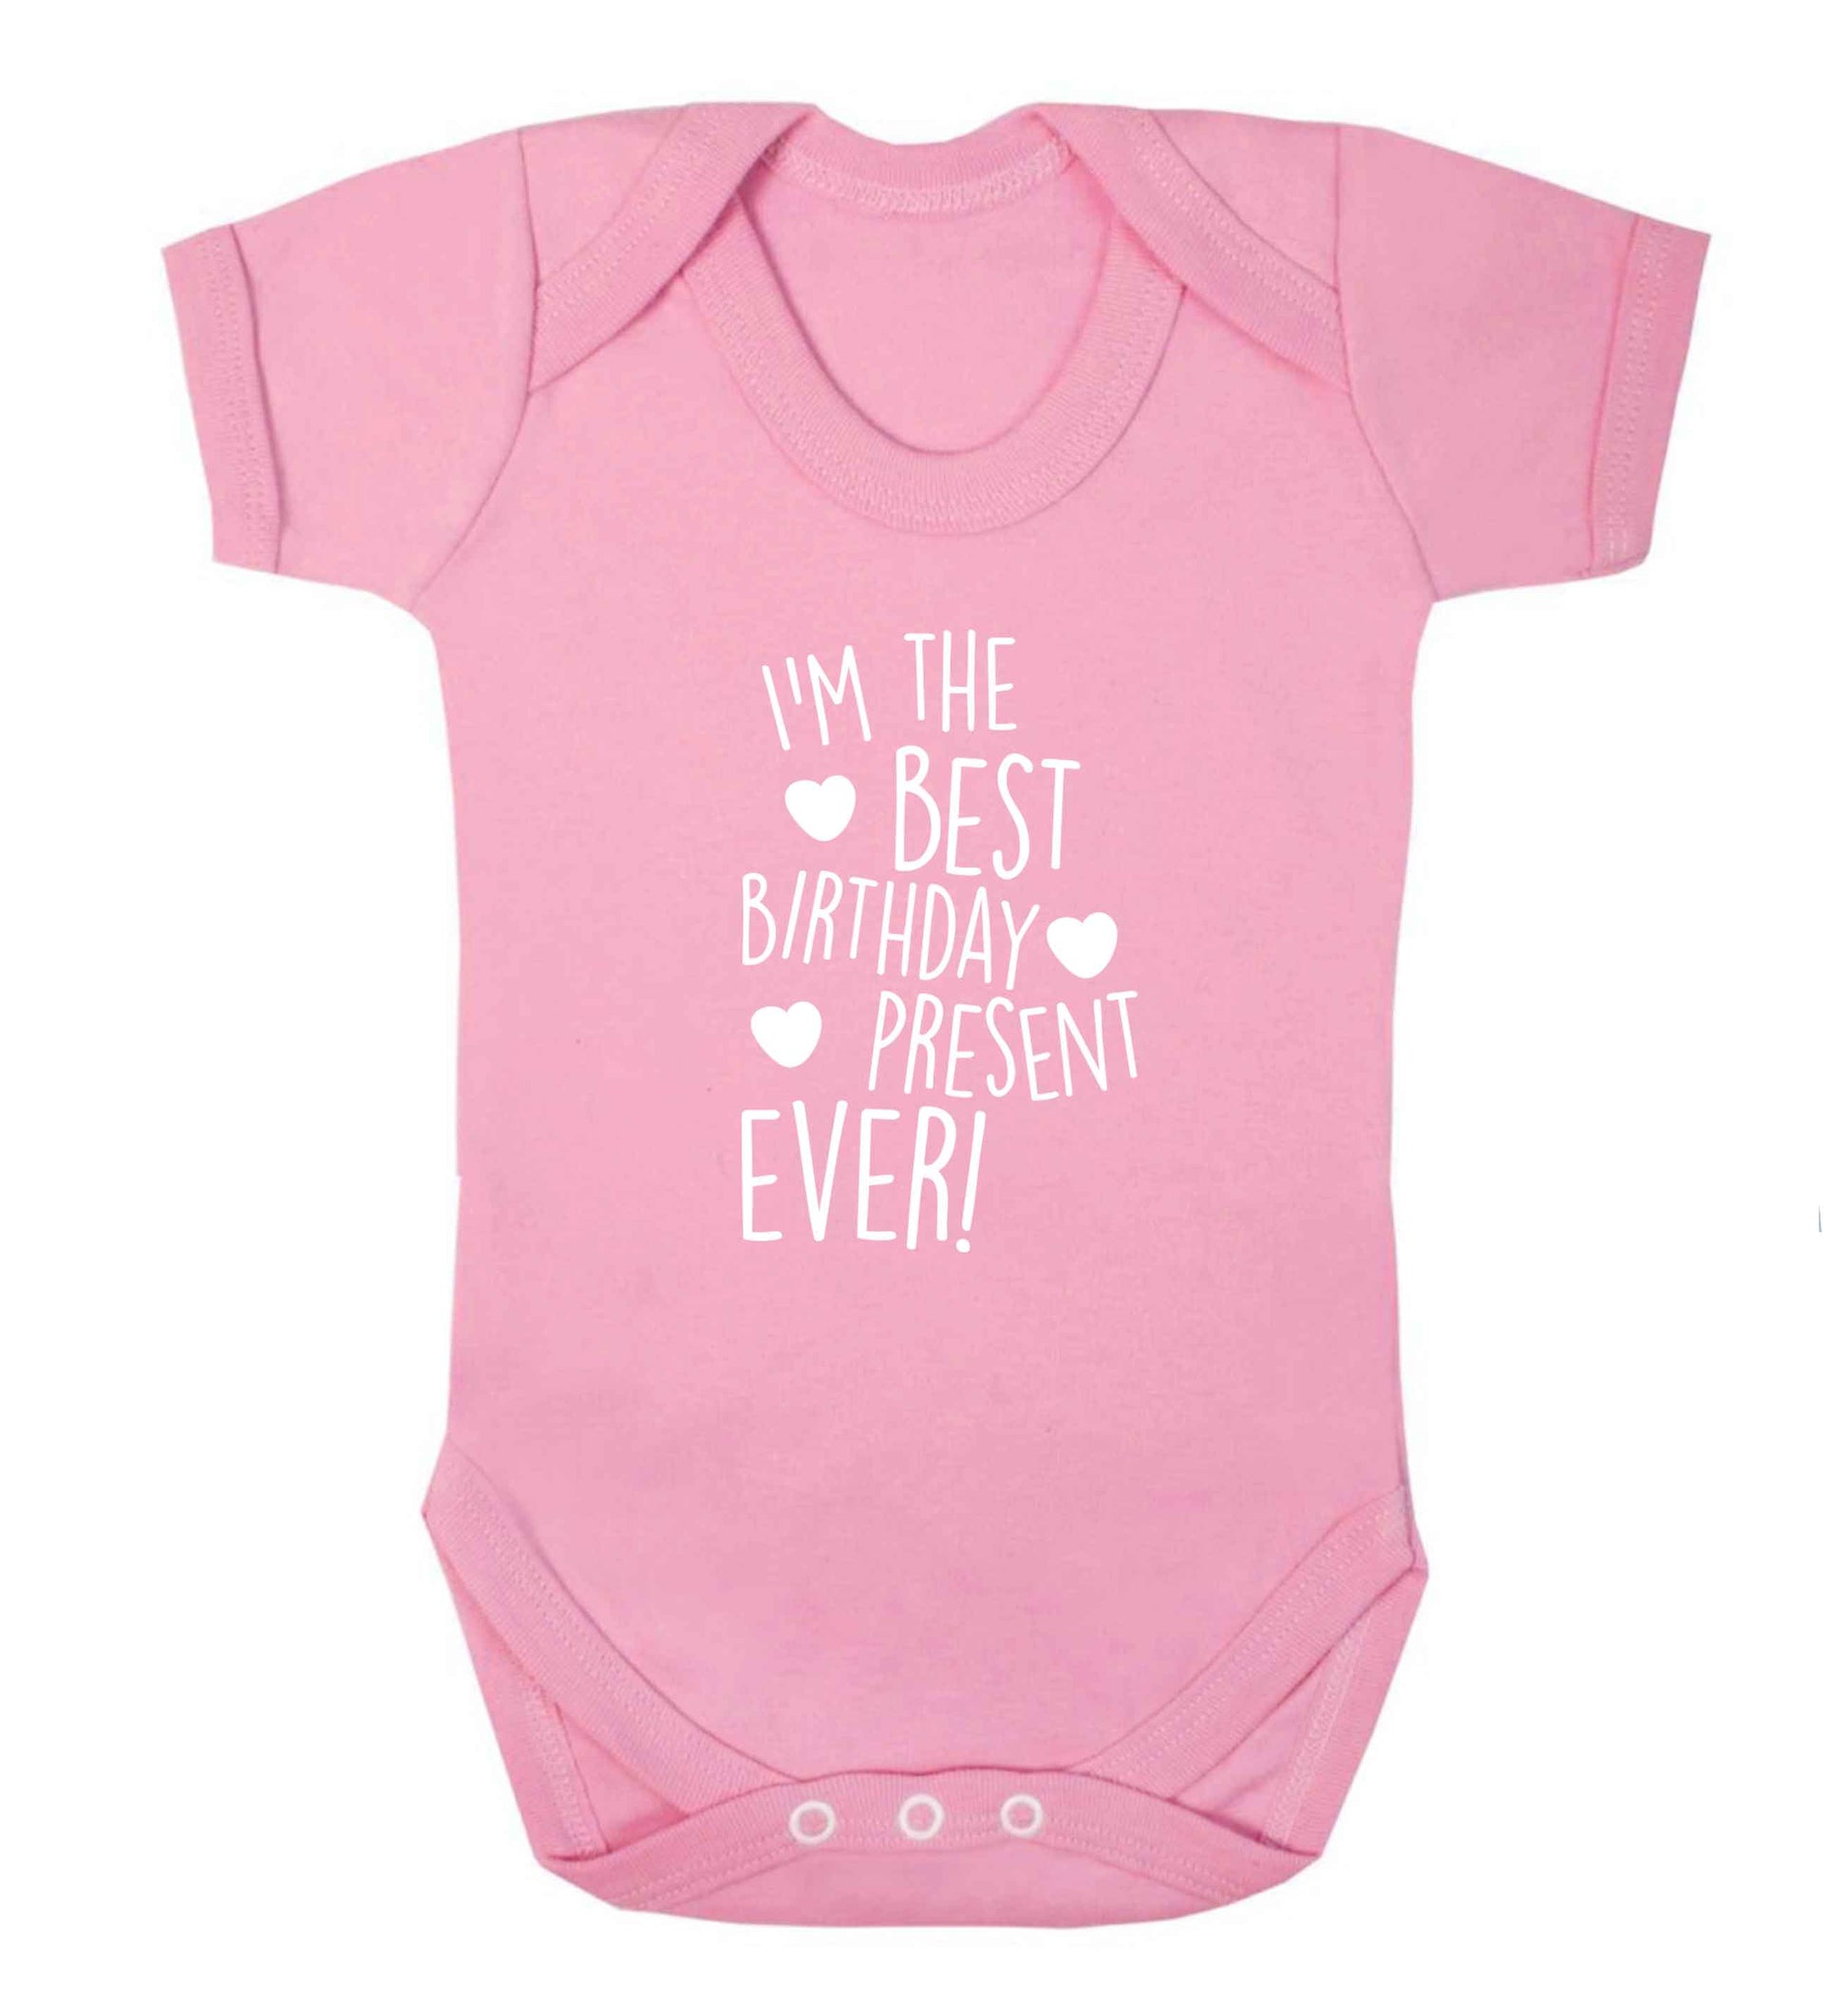 I'm the best birthday present ever baby vest pale pink 18-24 months